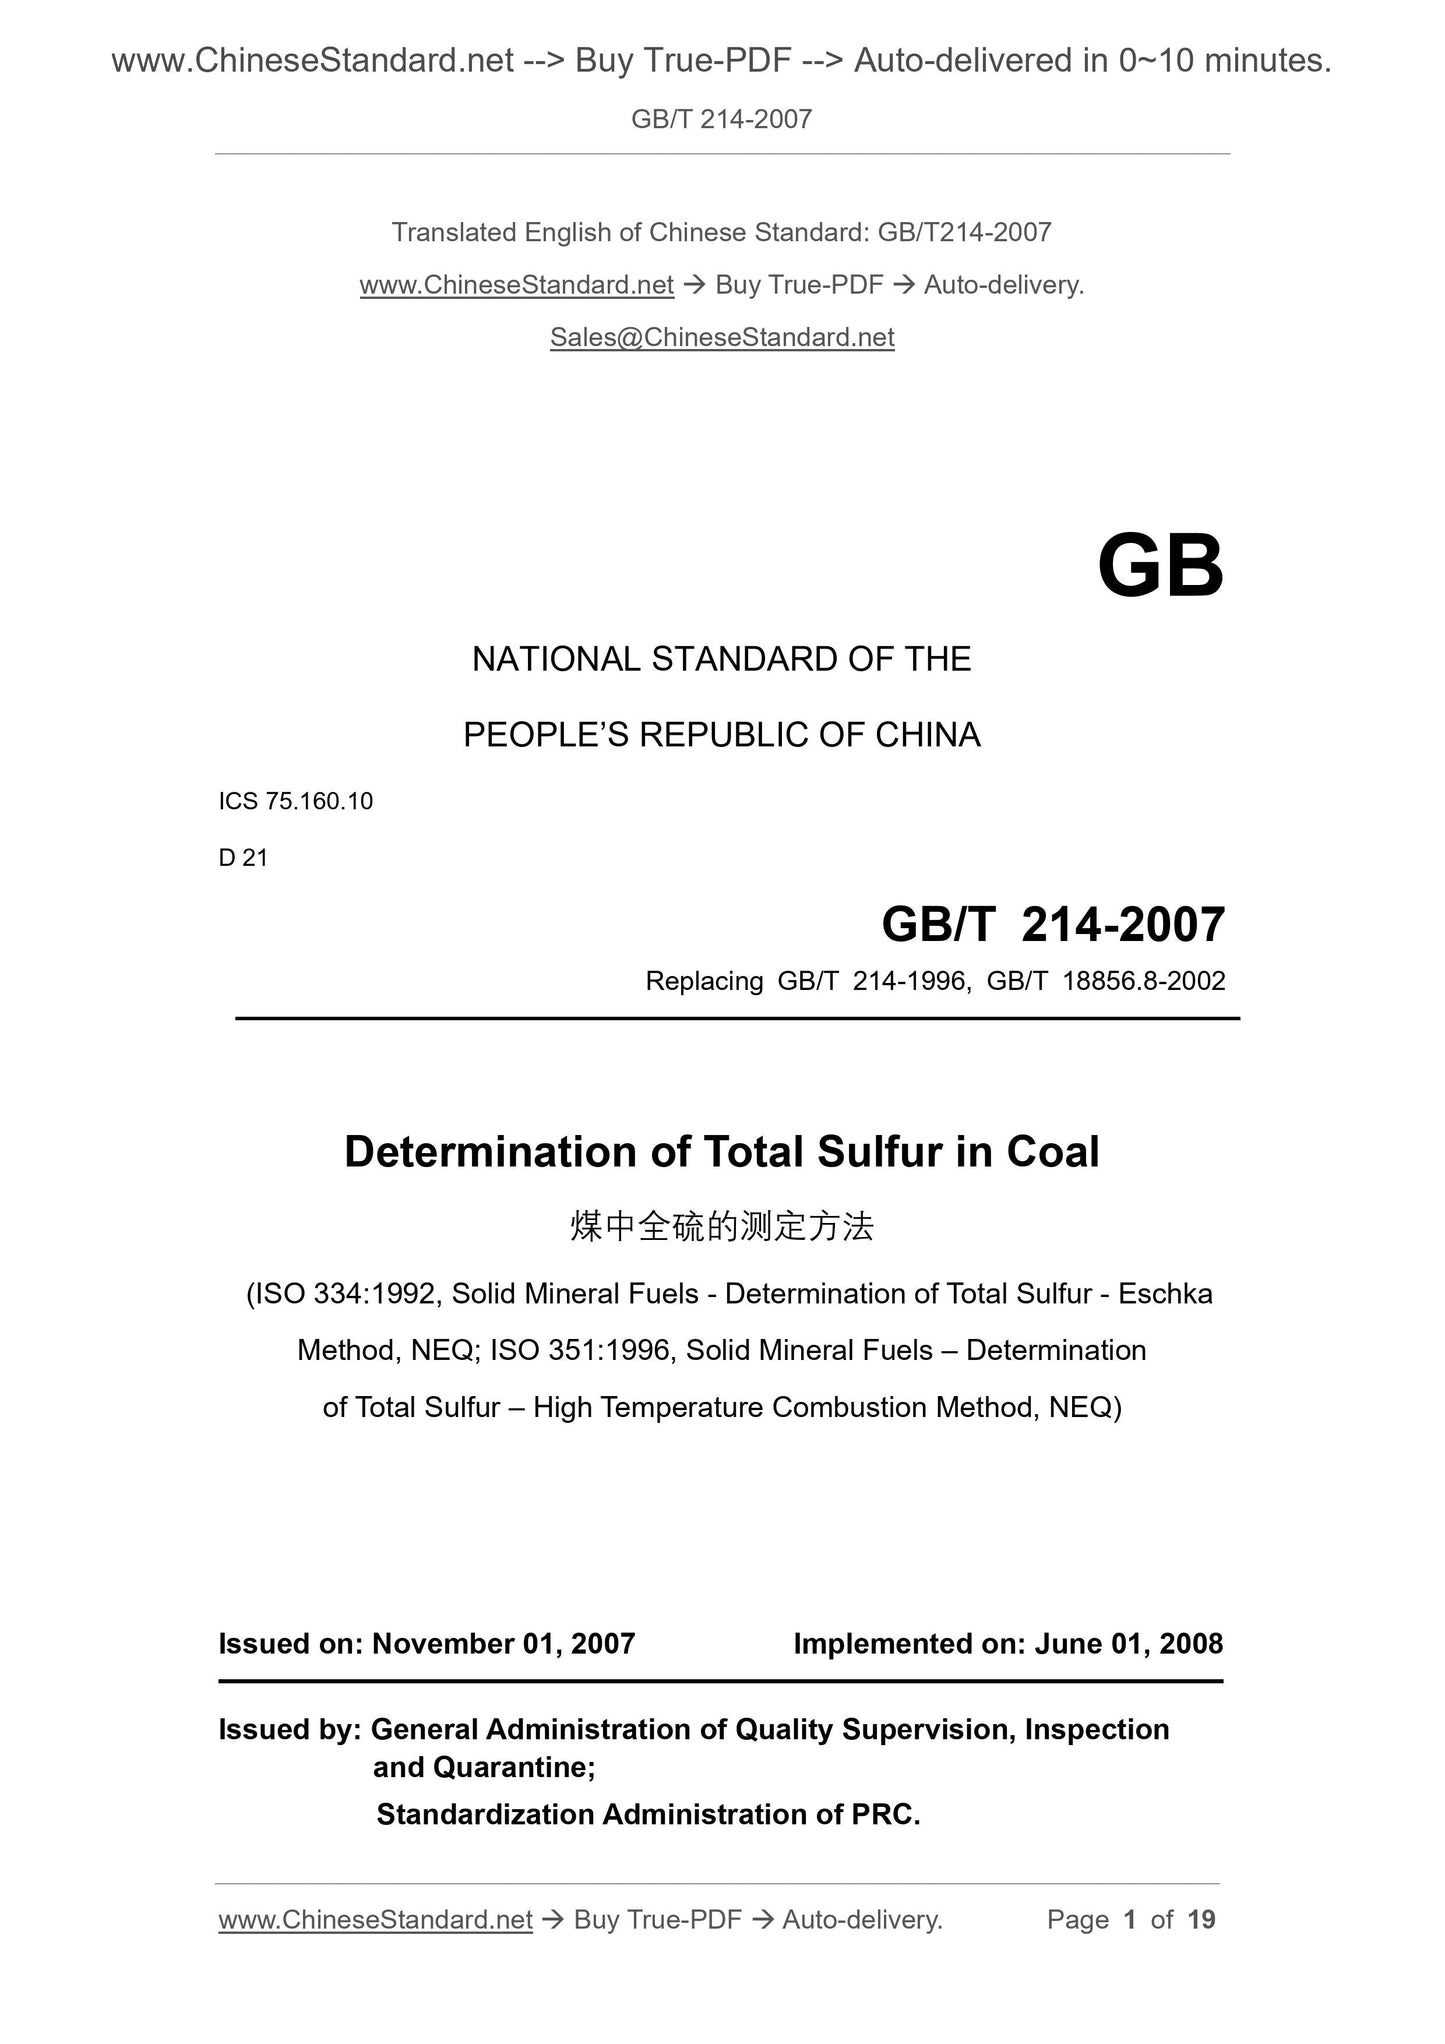 GB/T 214-2007 Page 1